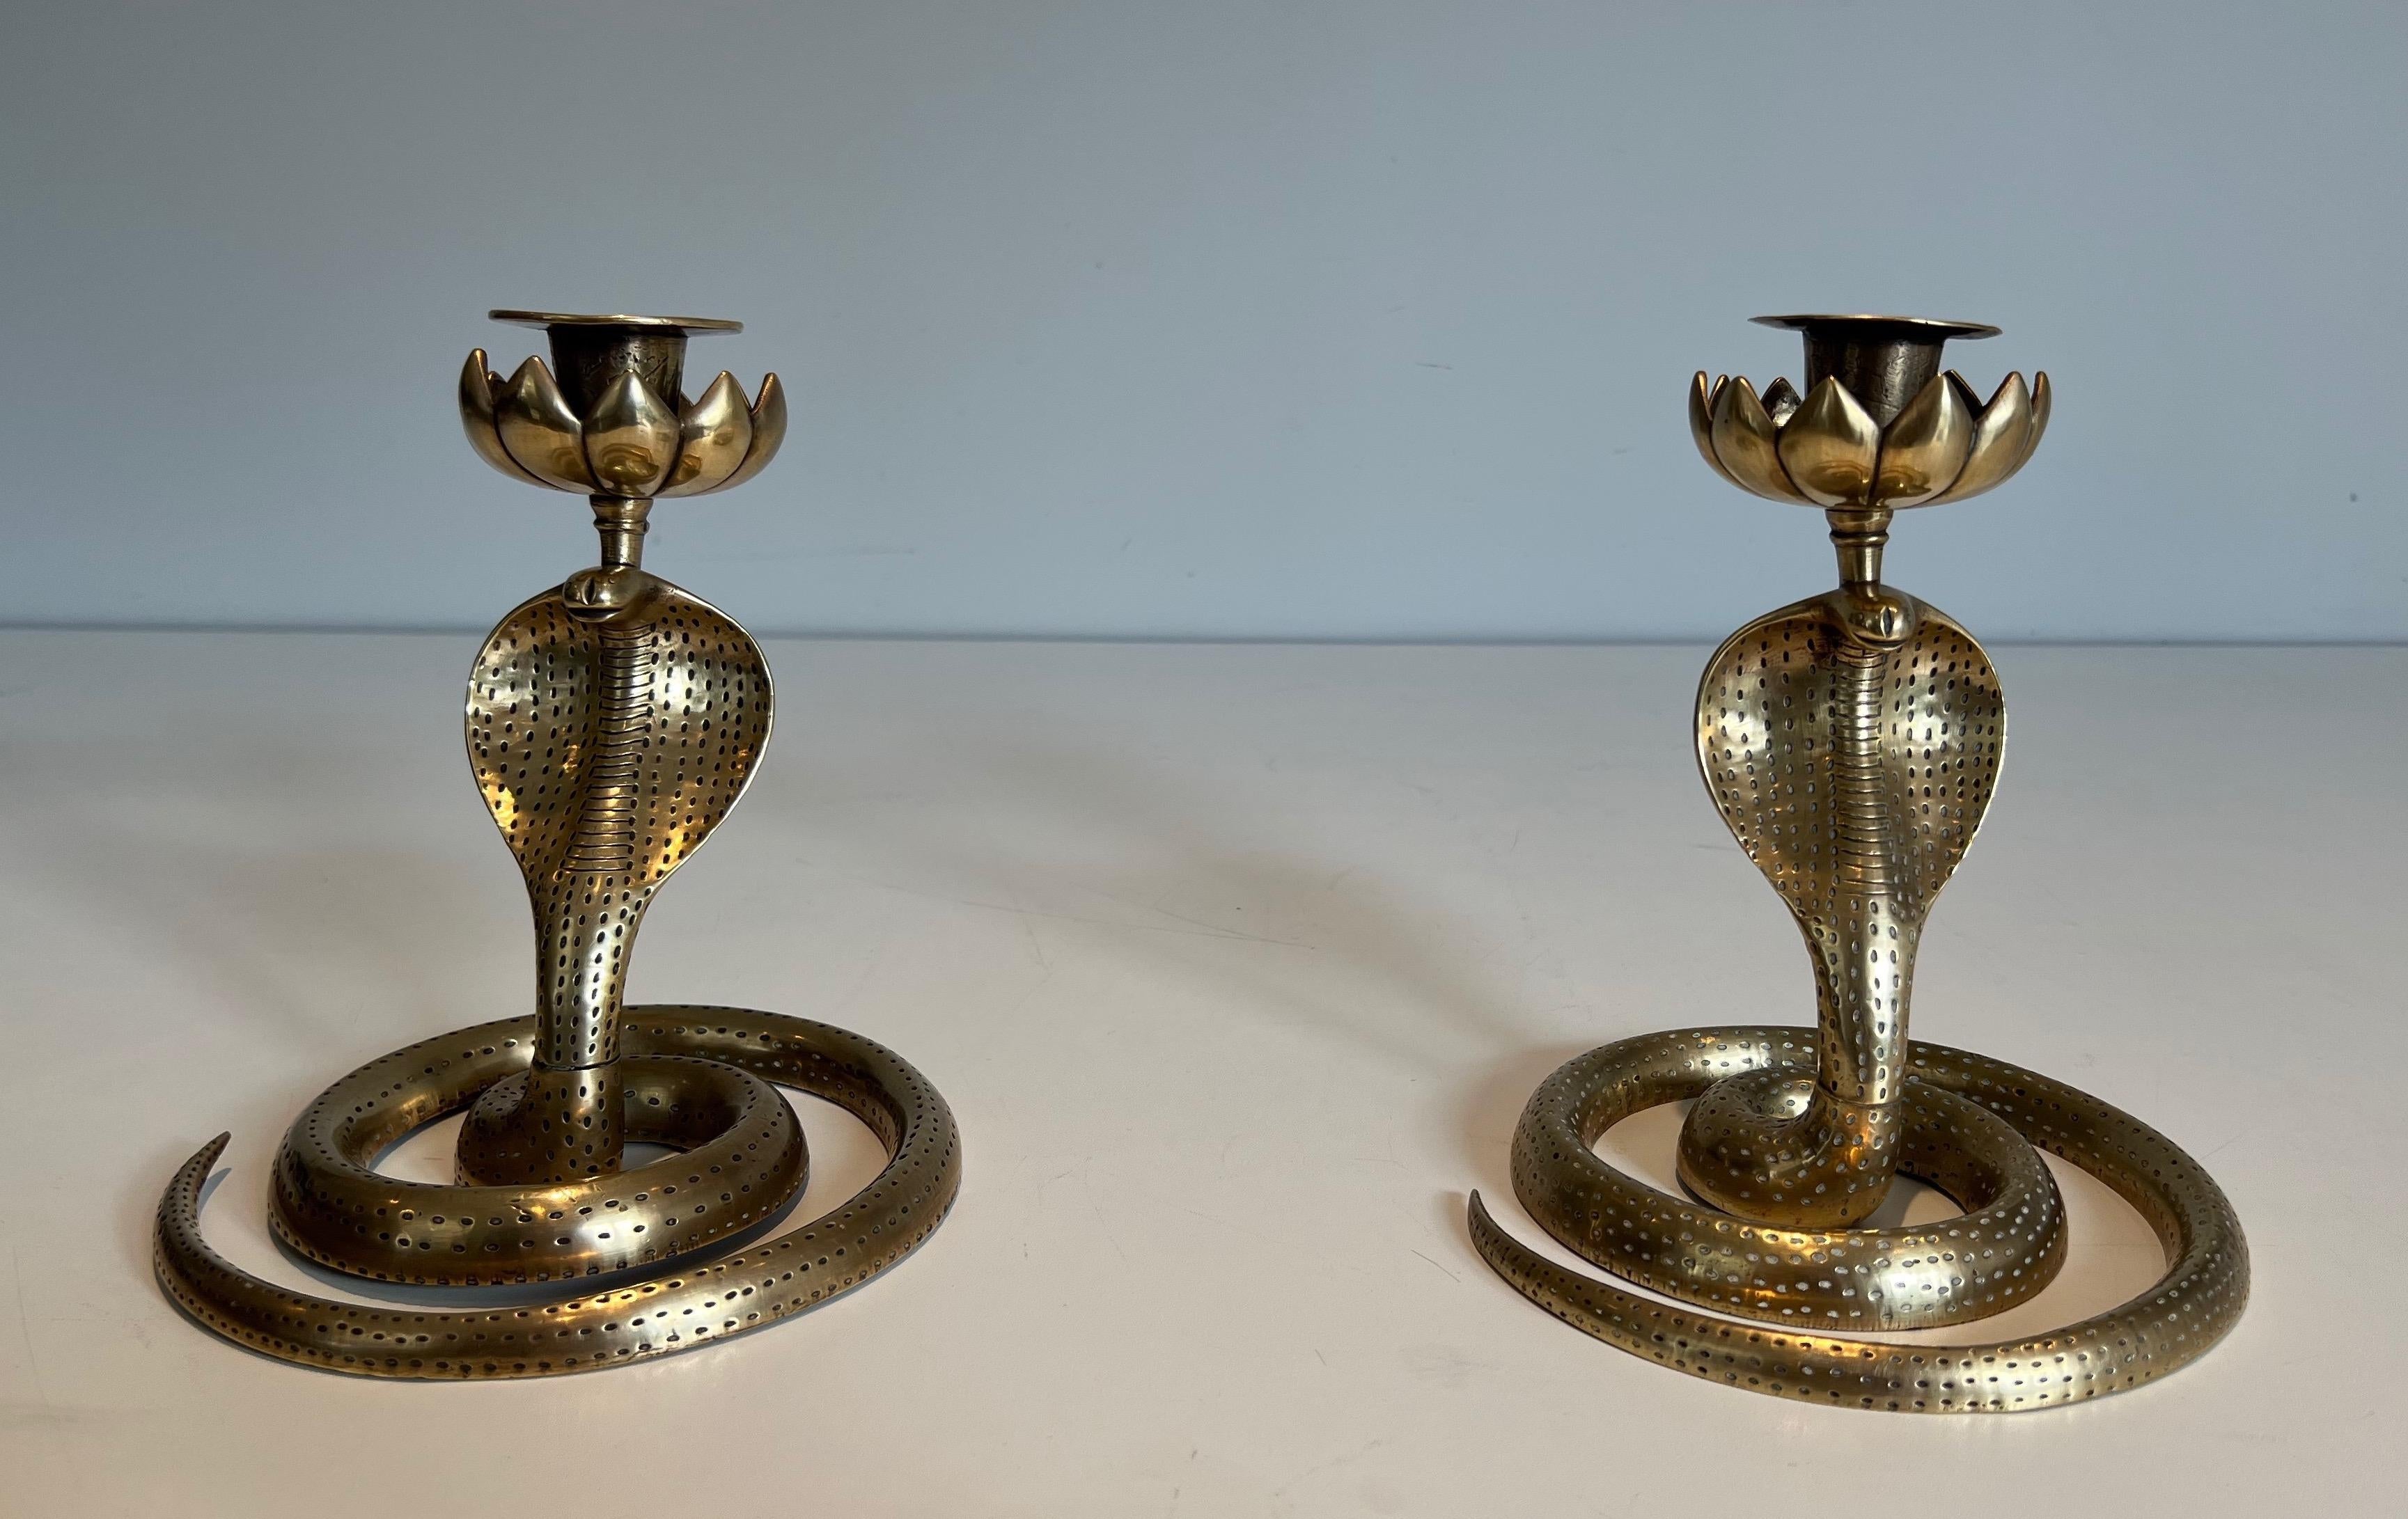 This very nice pair of cobra candlesticks is made of a finely chiseled bronze. This is a French work. Circa 1940